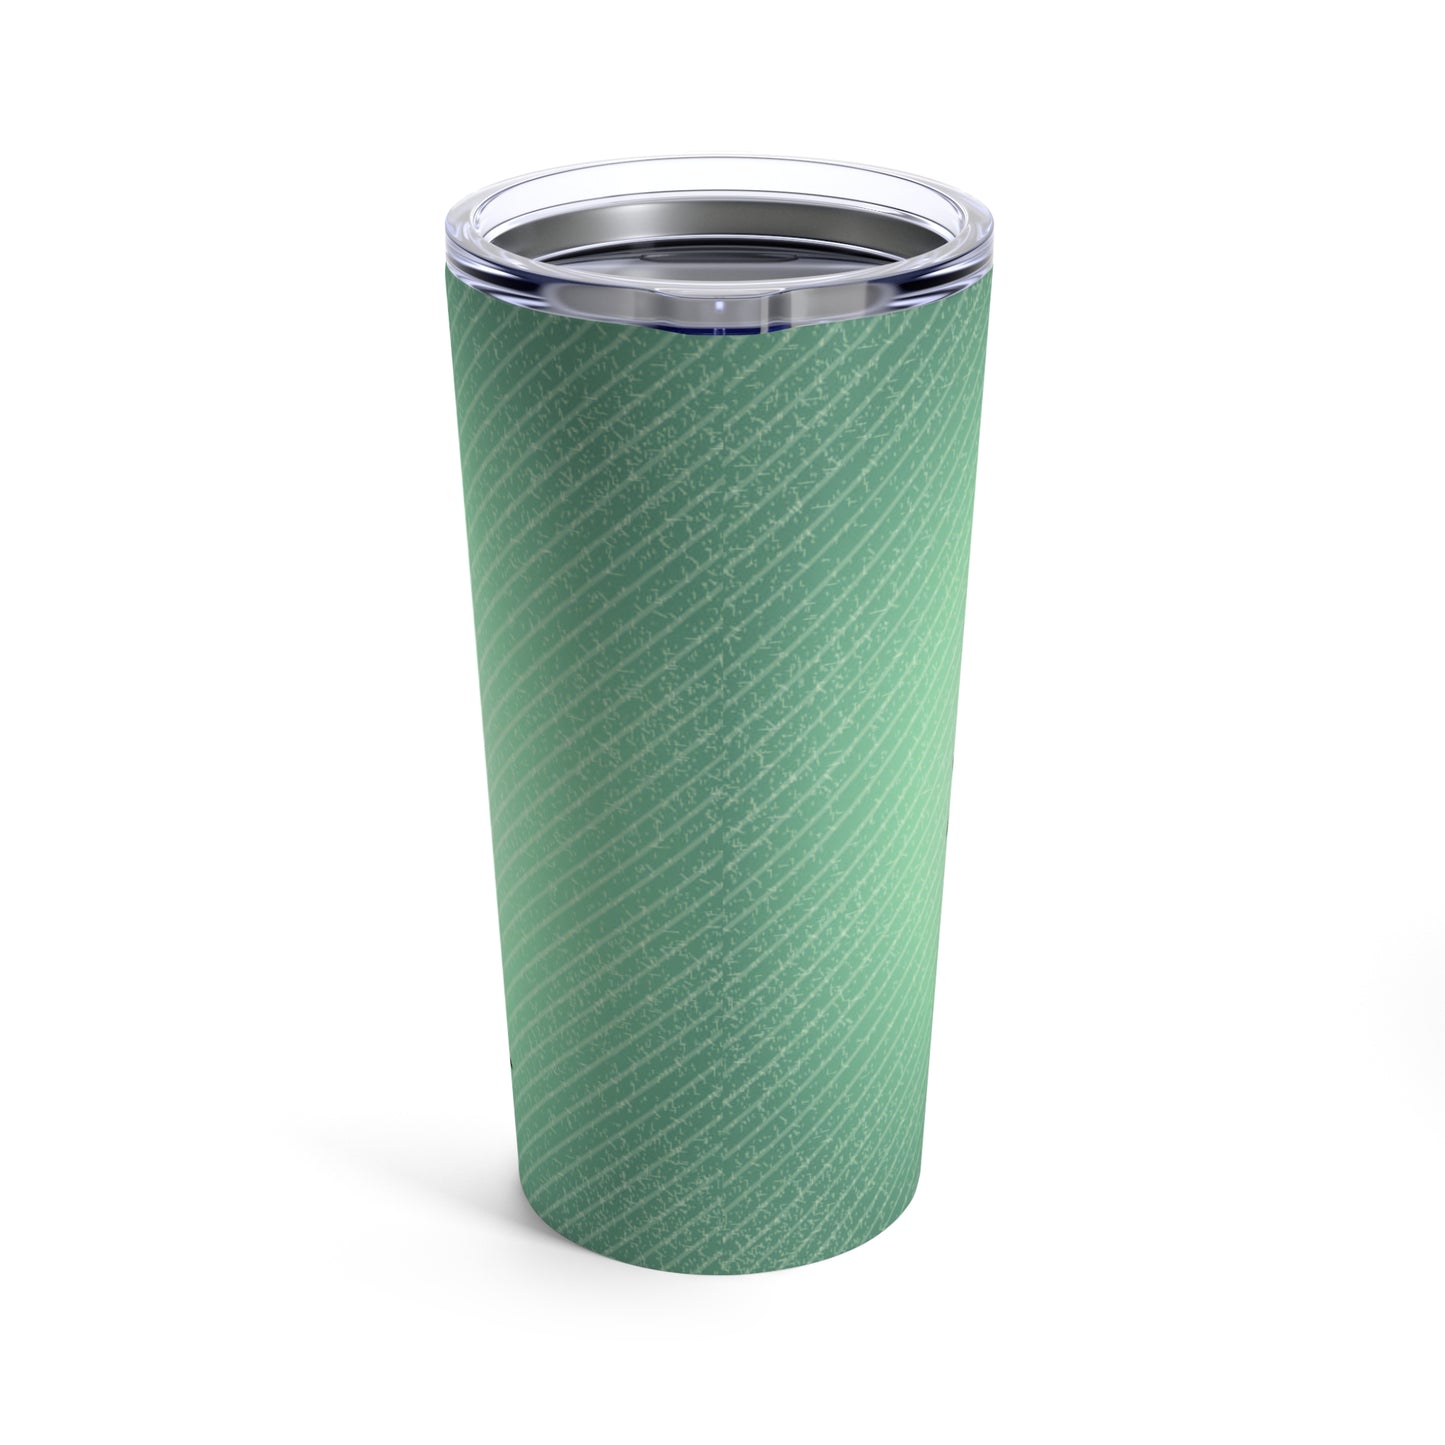 Tumbler - Spiritual Hand with Green Gradient Tumbler 20oz, Stainless Steel and Travel Size, Perfect for On the Road, at the Office, Or Home, Glossy Finish